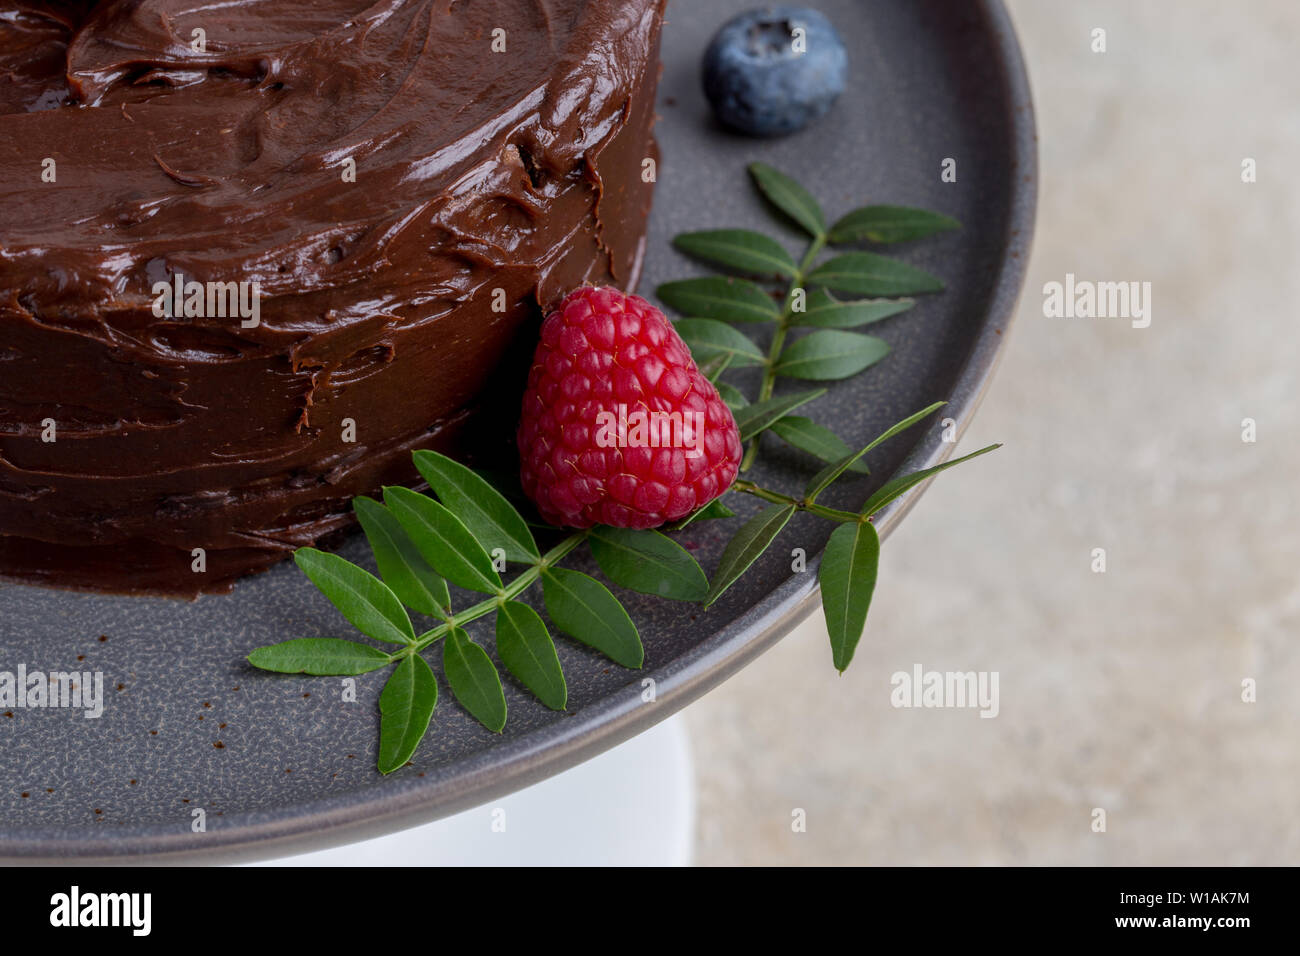 Macro chocolate cake with raspberries and leafs decor at gray plate. Stock Photo